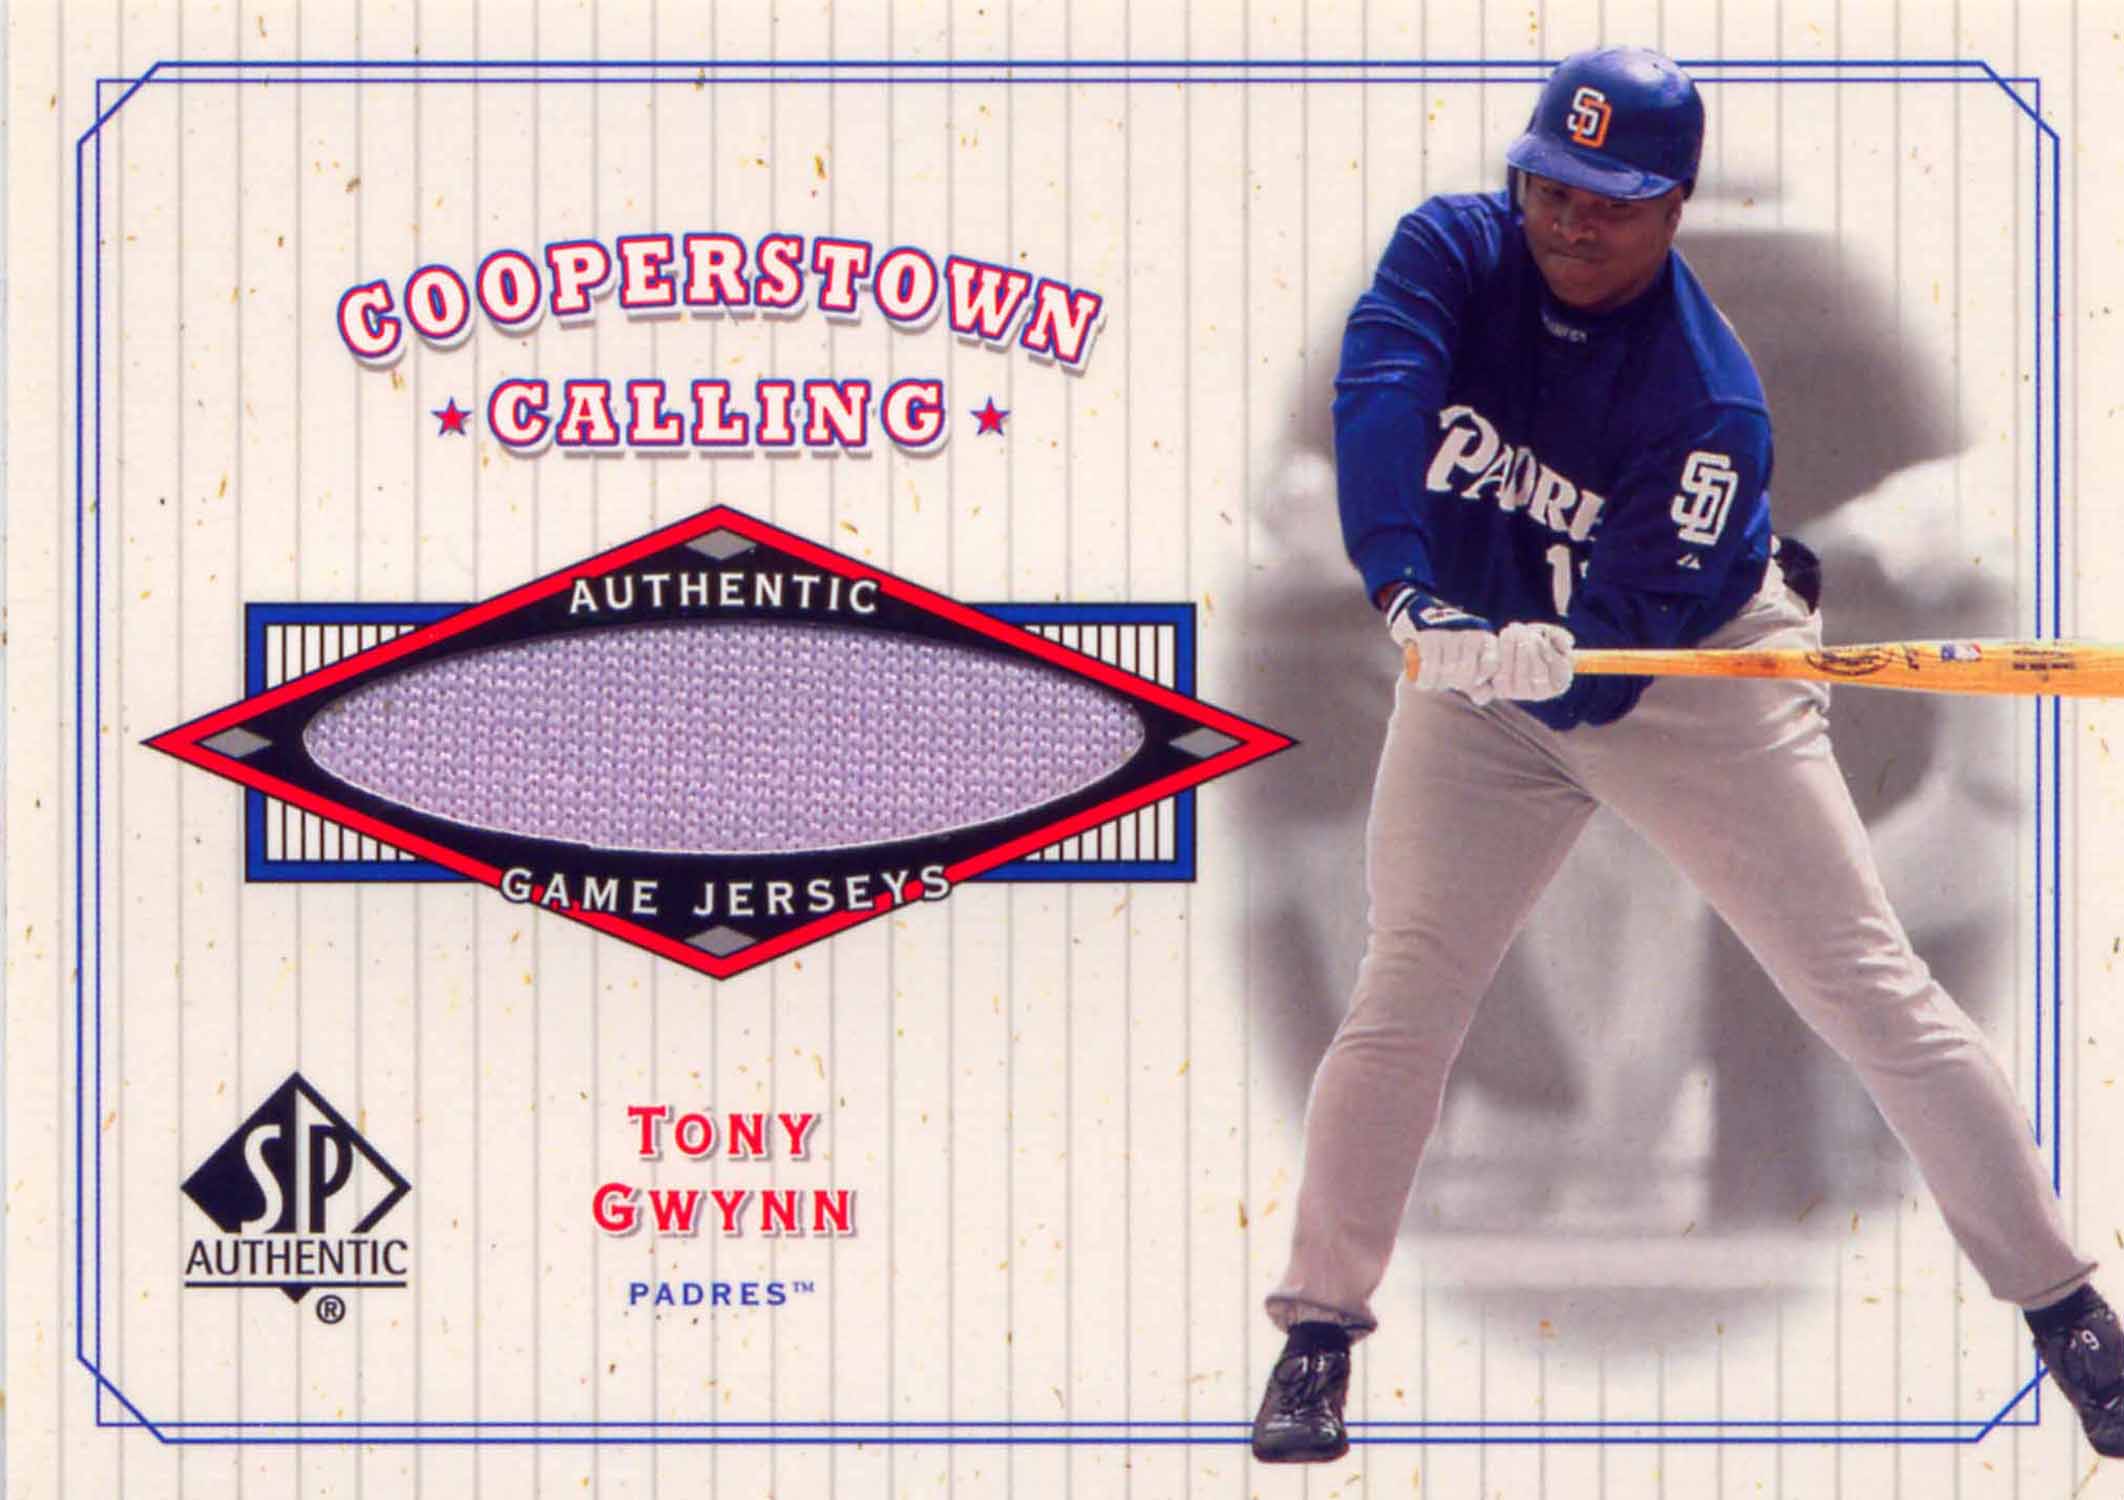 2001 SP Authentic Cooperstown Calling Game Jersey